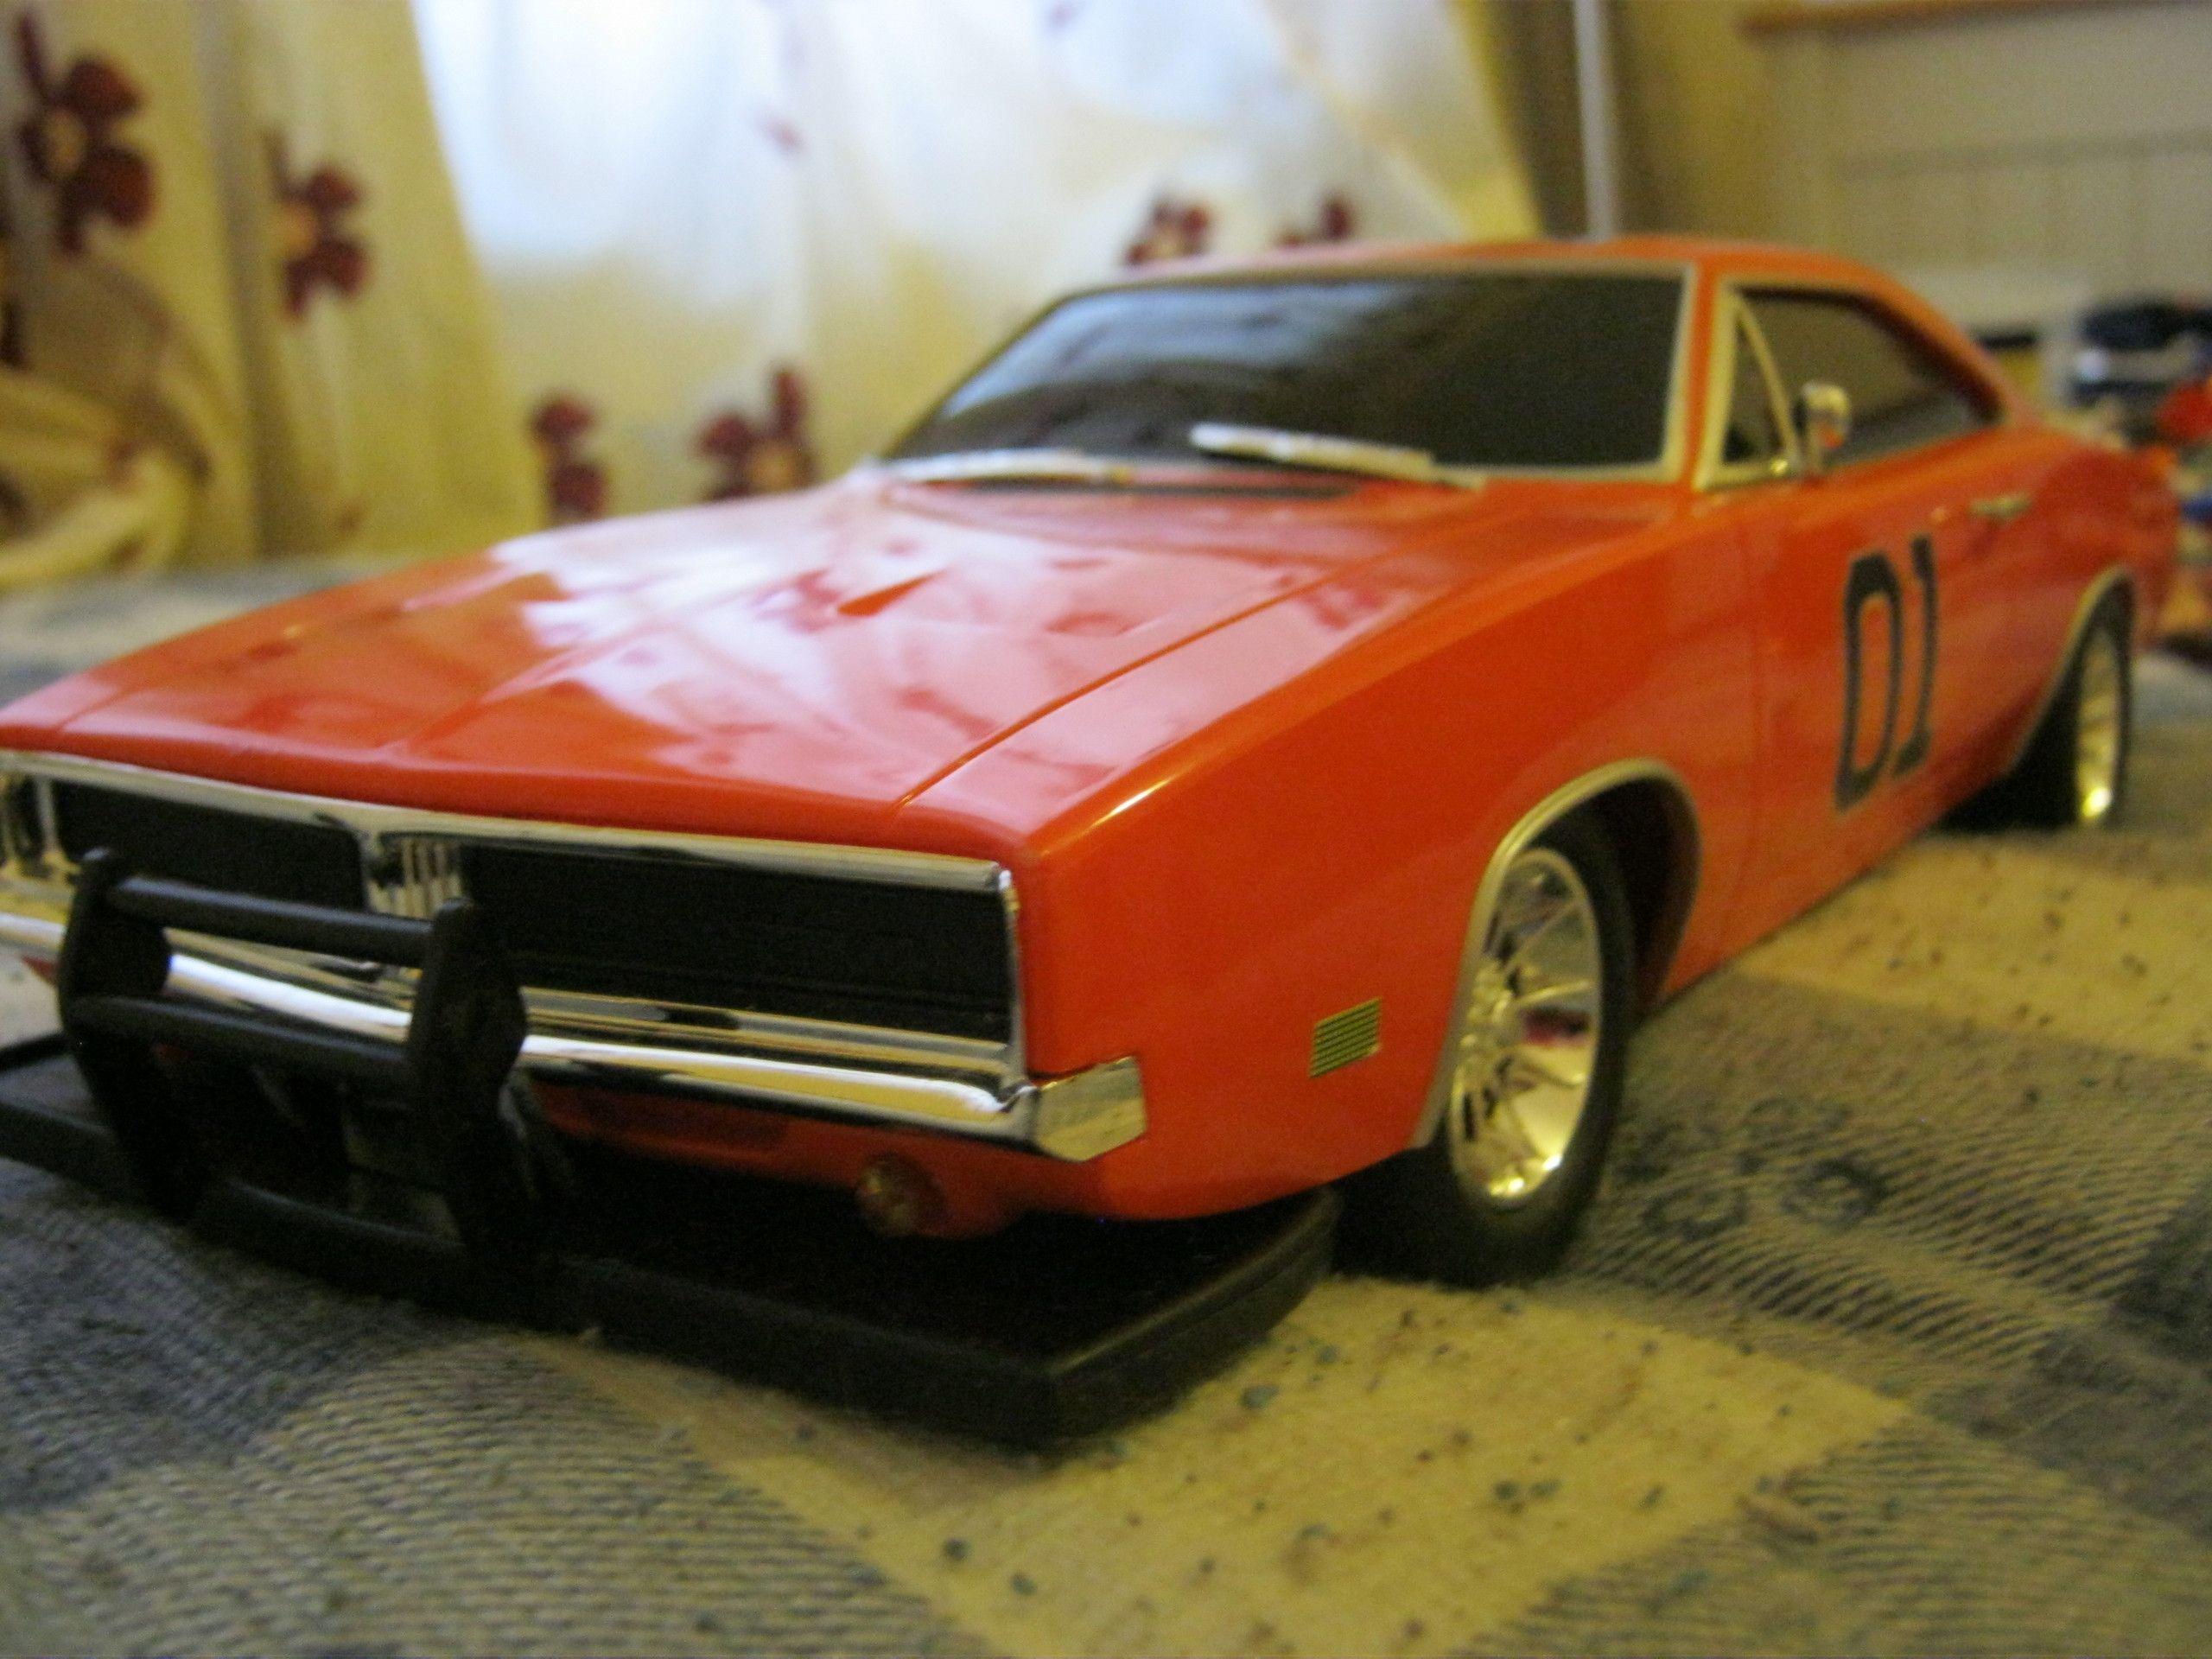 The Dukes Of Hazzard image general lee HD wallpaper and background